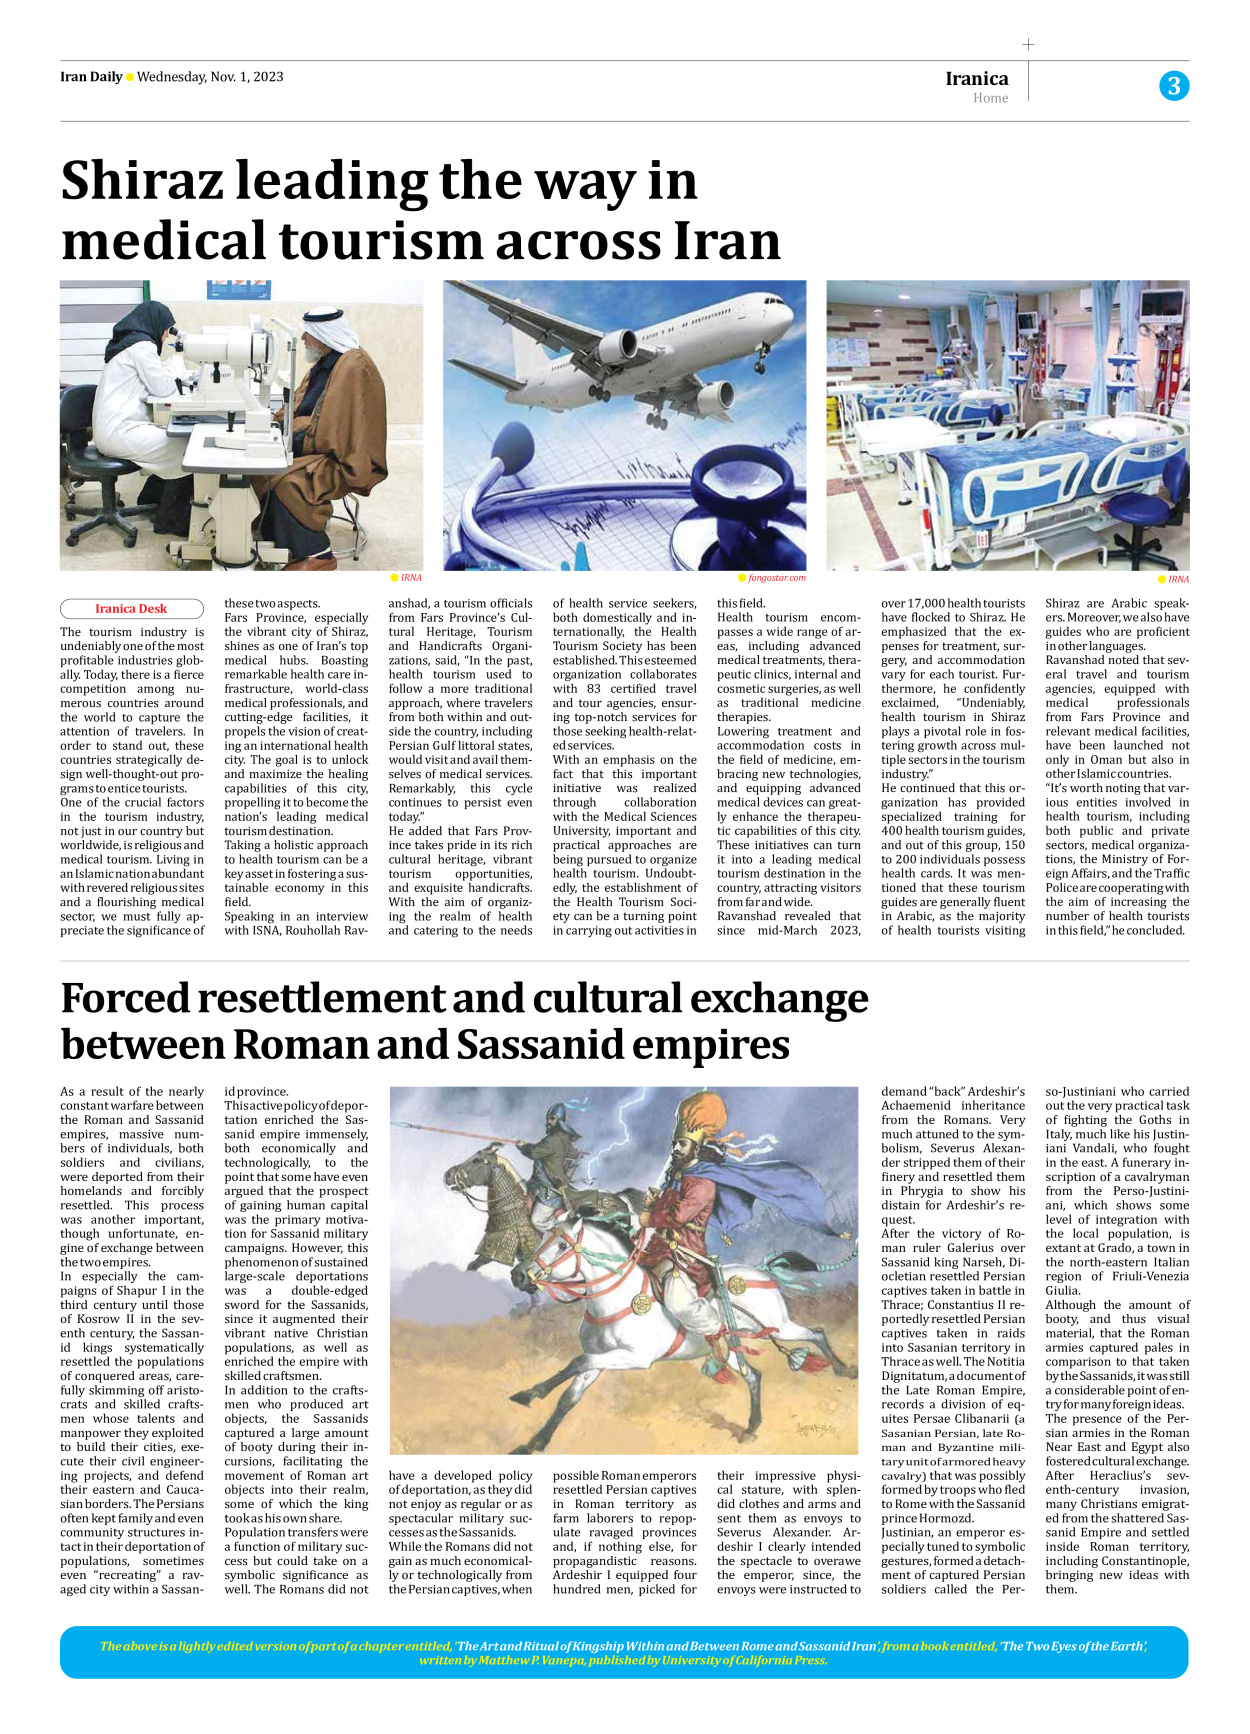 Iran Daily - Number Seven Thousand Four Hundred and Twenty Three - 01 November 2023 - Page 3